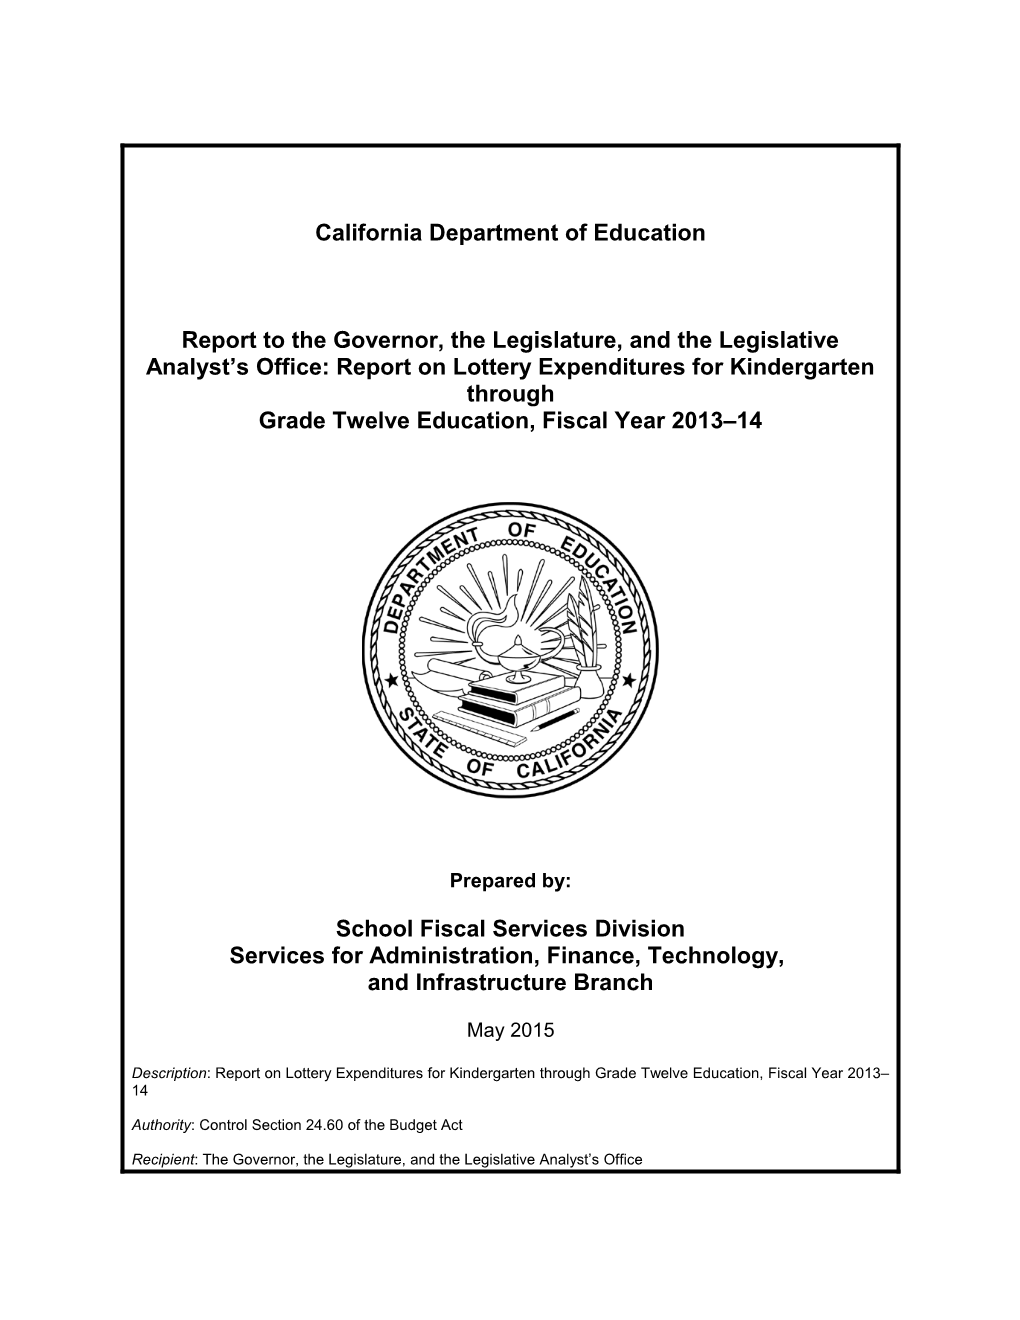 Report on Lottery Expenditures 2013-14 - Lottery (CA Dept of Education)